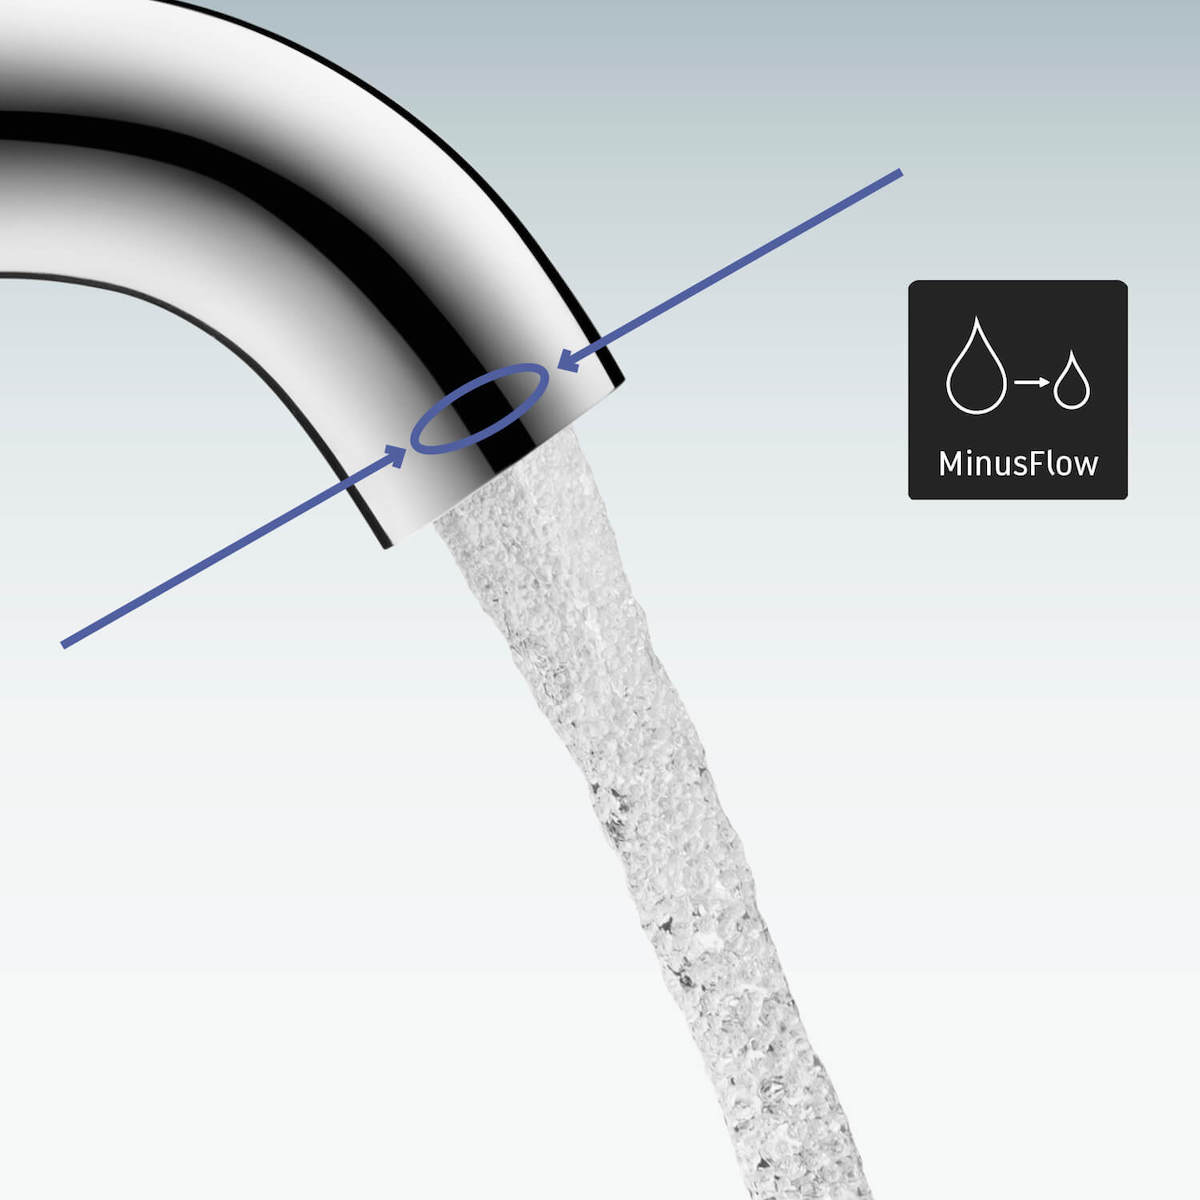 Image caption: The Duravit AG faucets with MinusFlow function allow for a particularly efficient use of the ever scarcer resource of water, reducing water consumption when washing hands by up to 40 percent, rising to as much as 60 percent on the showerheads, while ensuring an almost equivalent experience. | Image source: Duravit AG